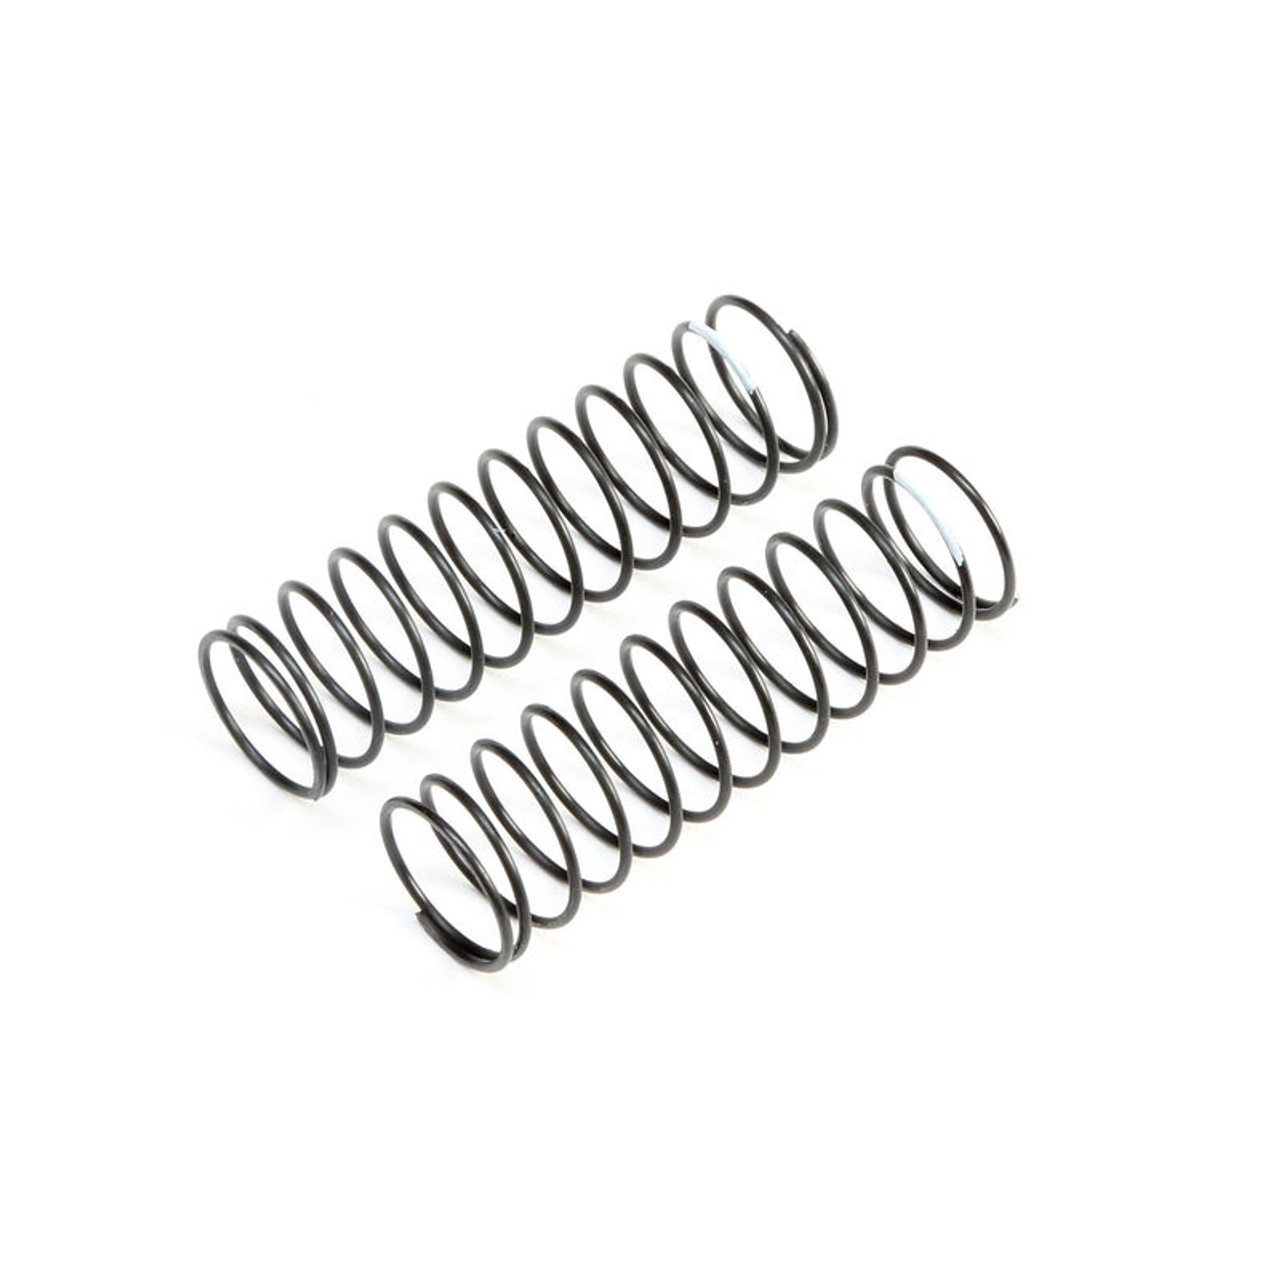 TLR White Rear Springs, Low Frequency, 12mm (2)